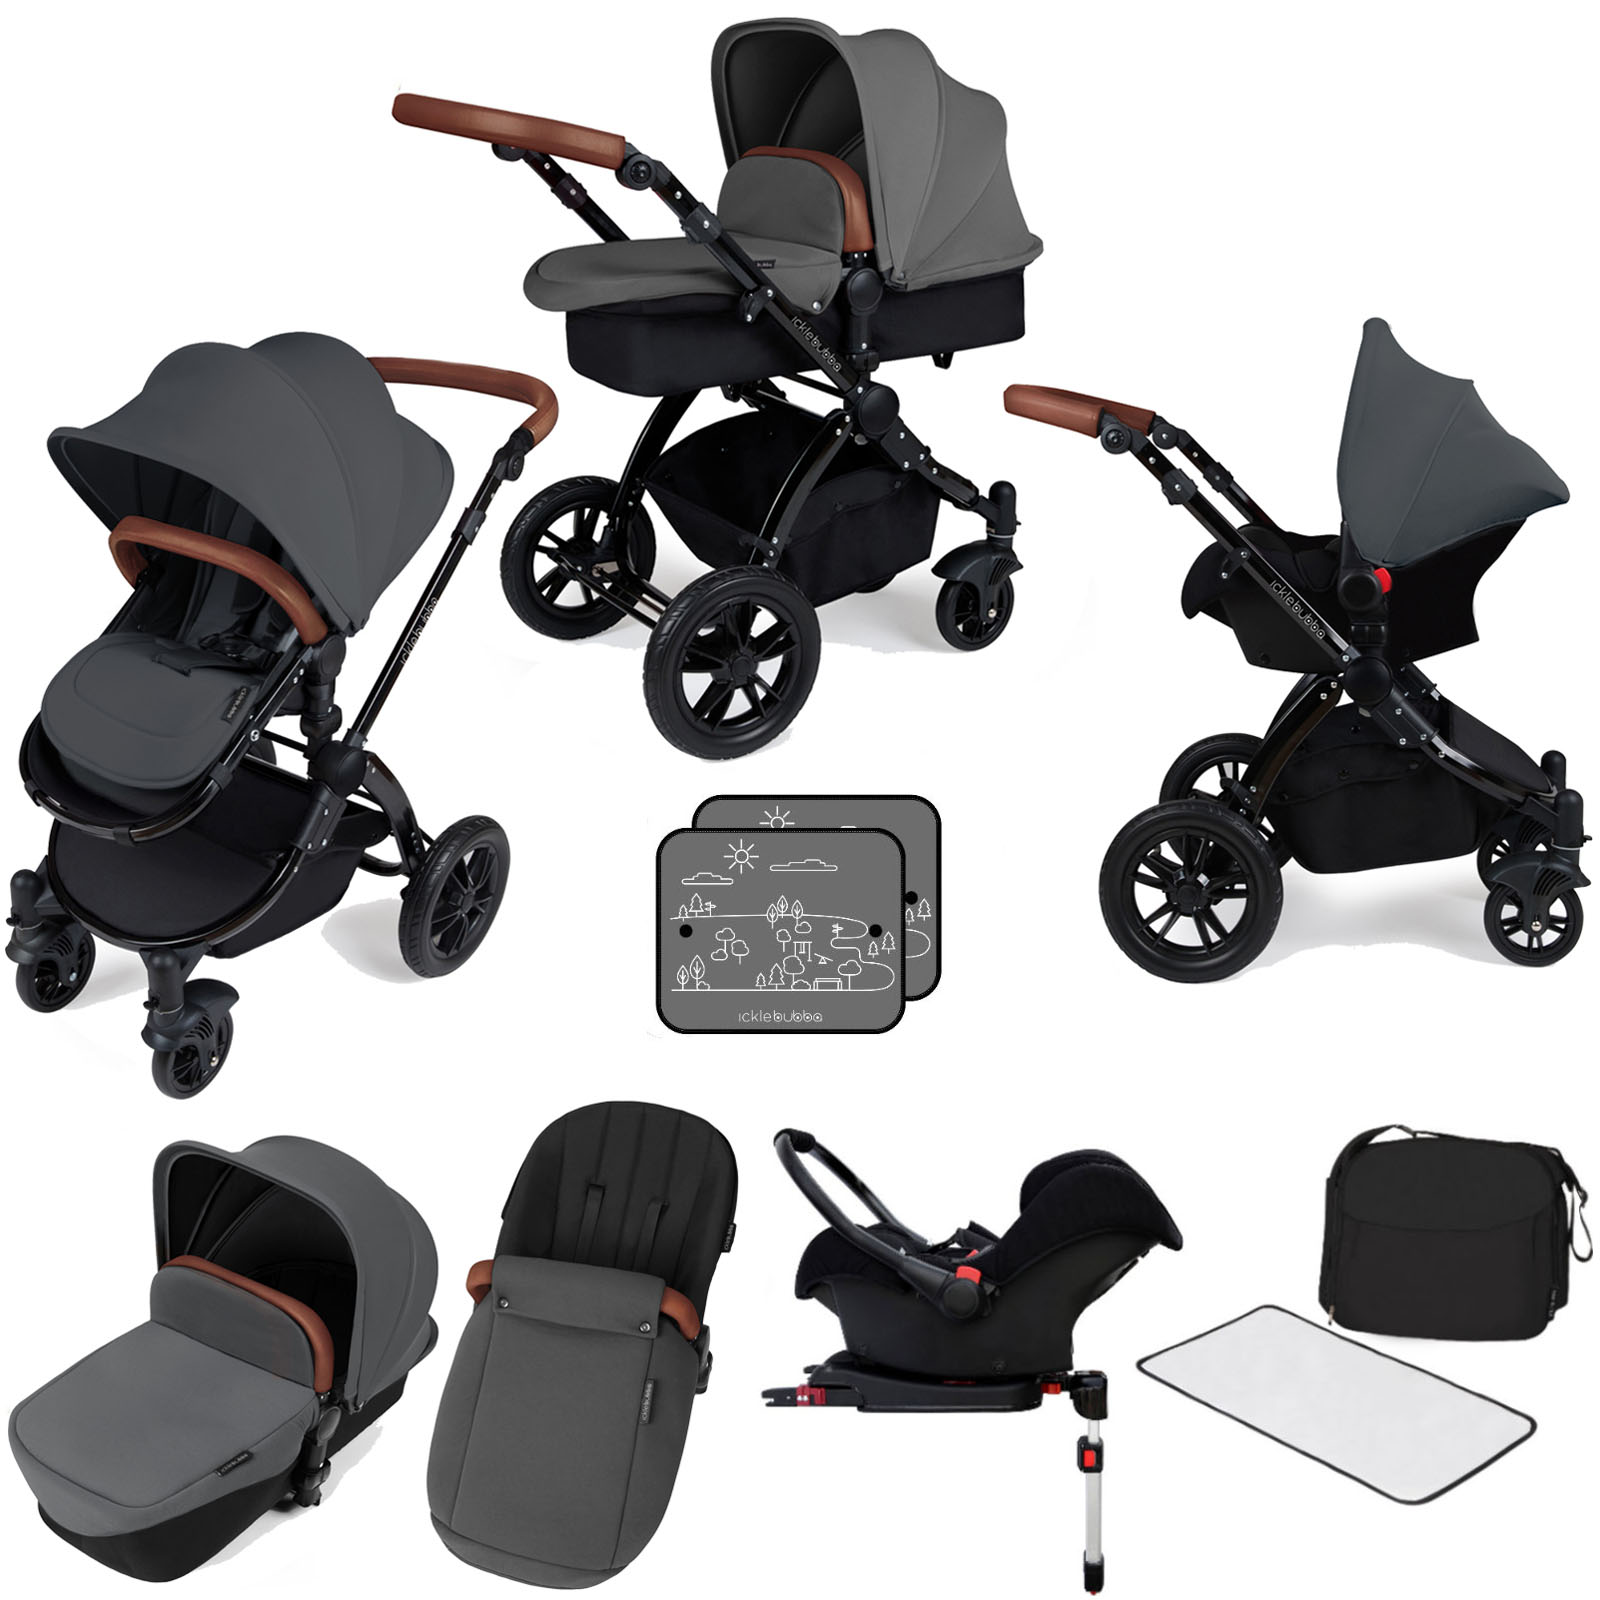 Ickle bubba Stomp V3 Black All In One Travel System & Isofix Base - Graphite Grey...